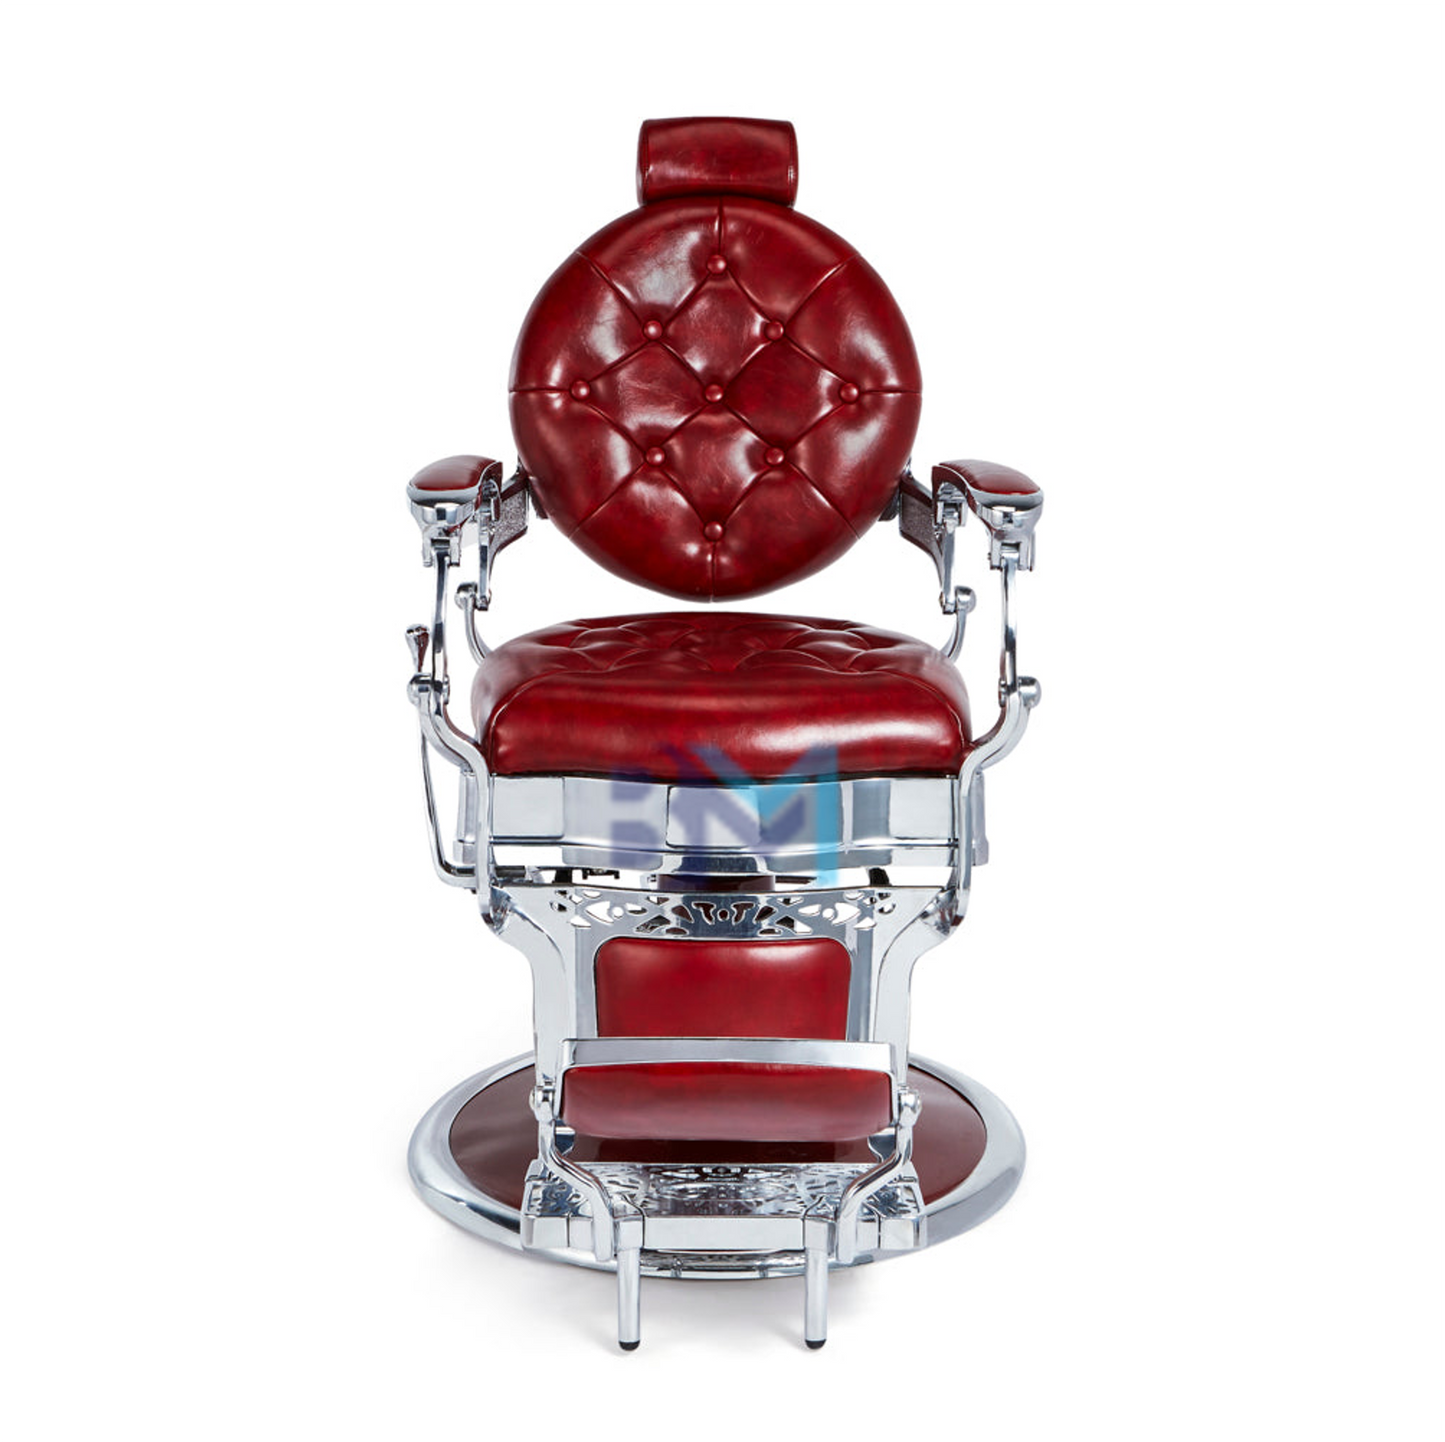 Red and Silver Vintage Barber Chair